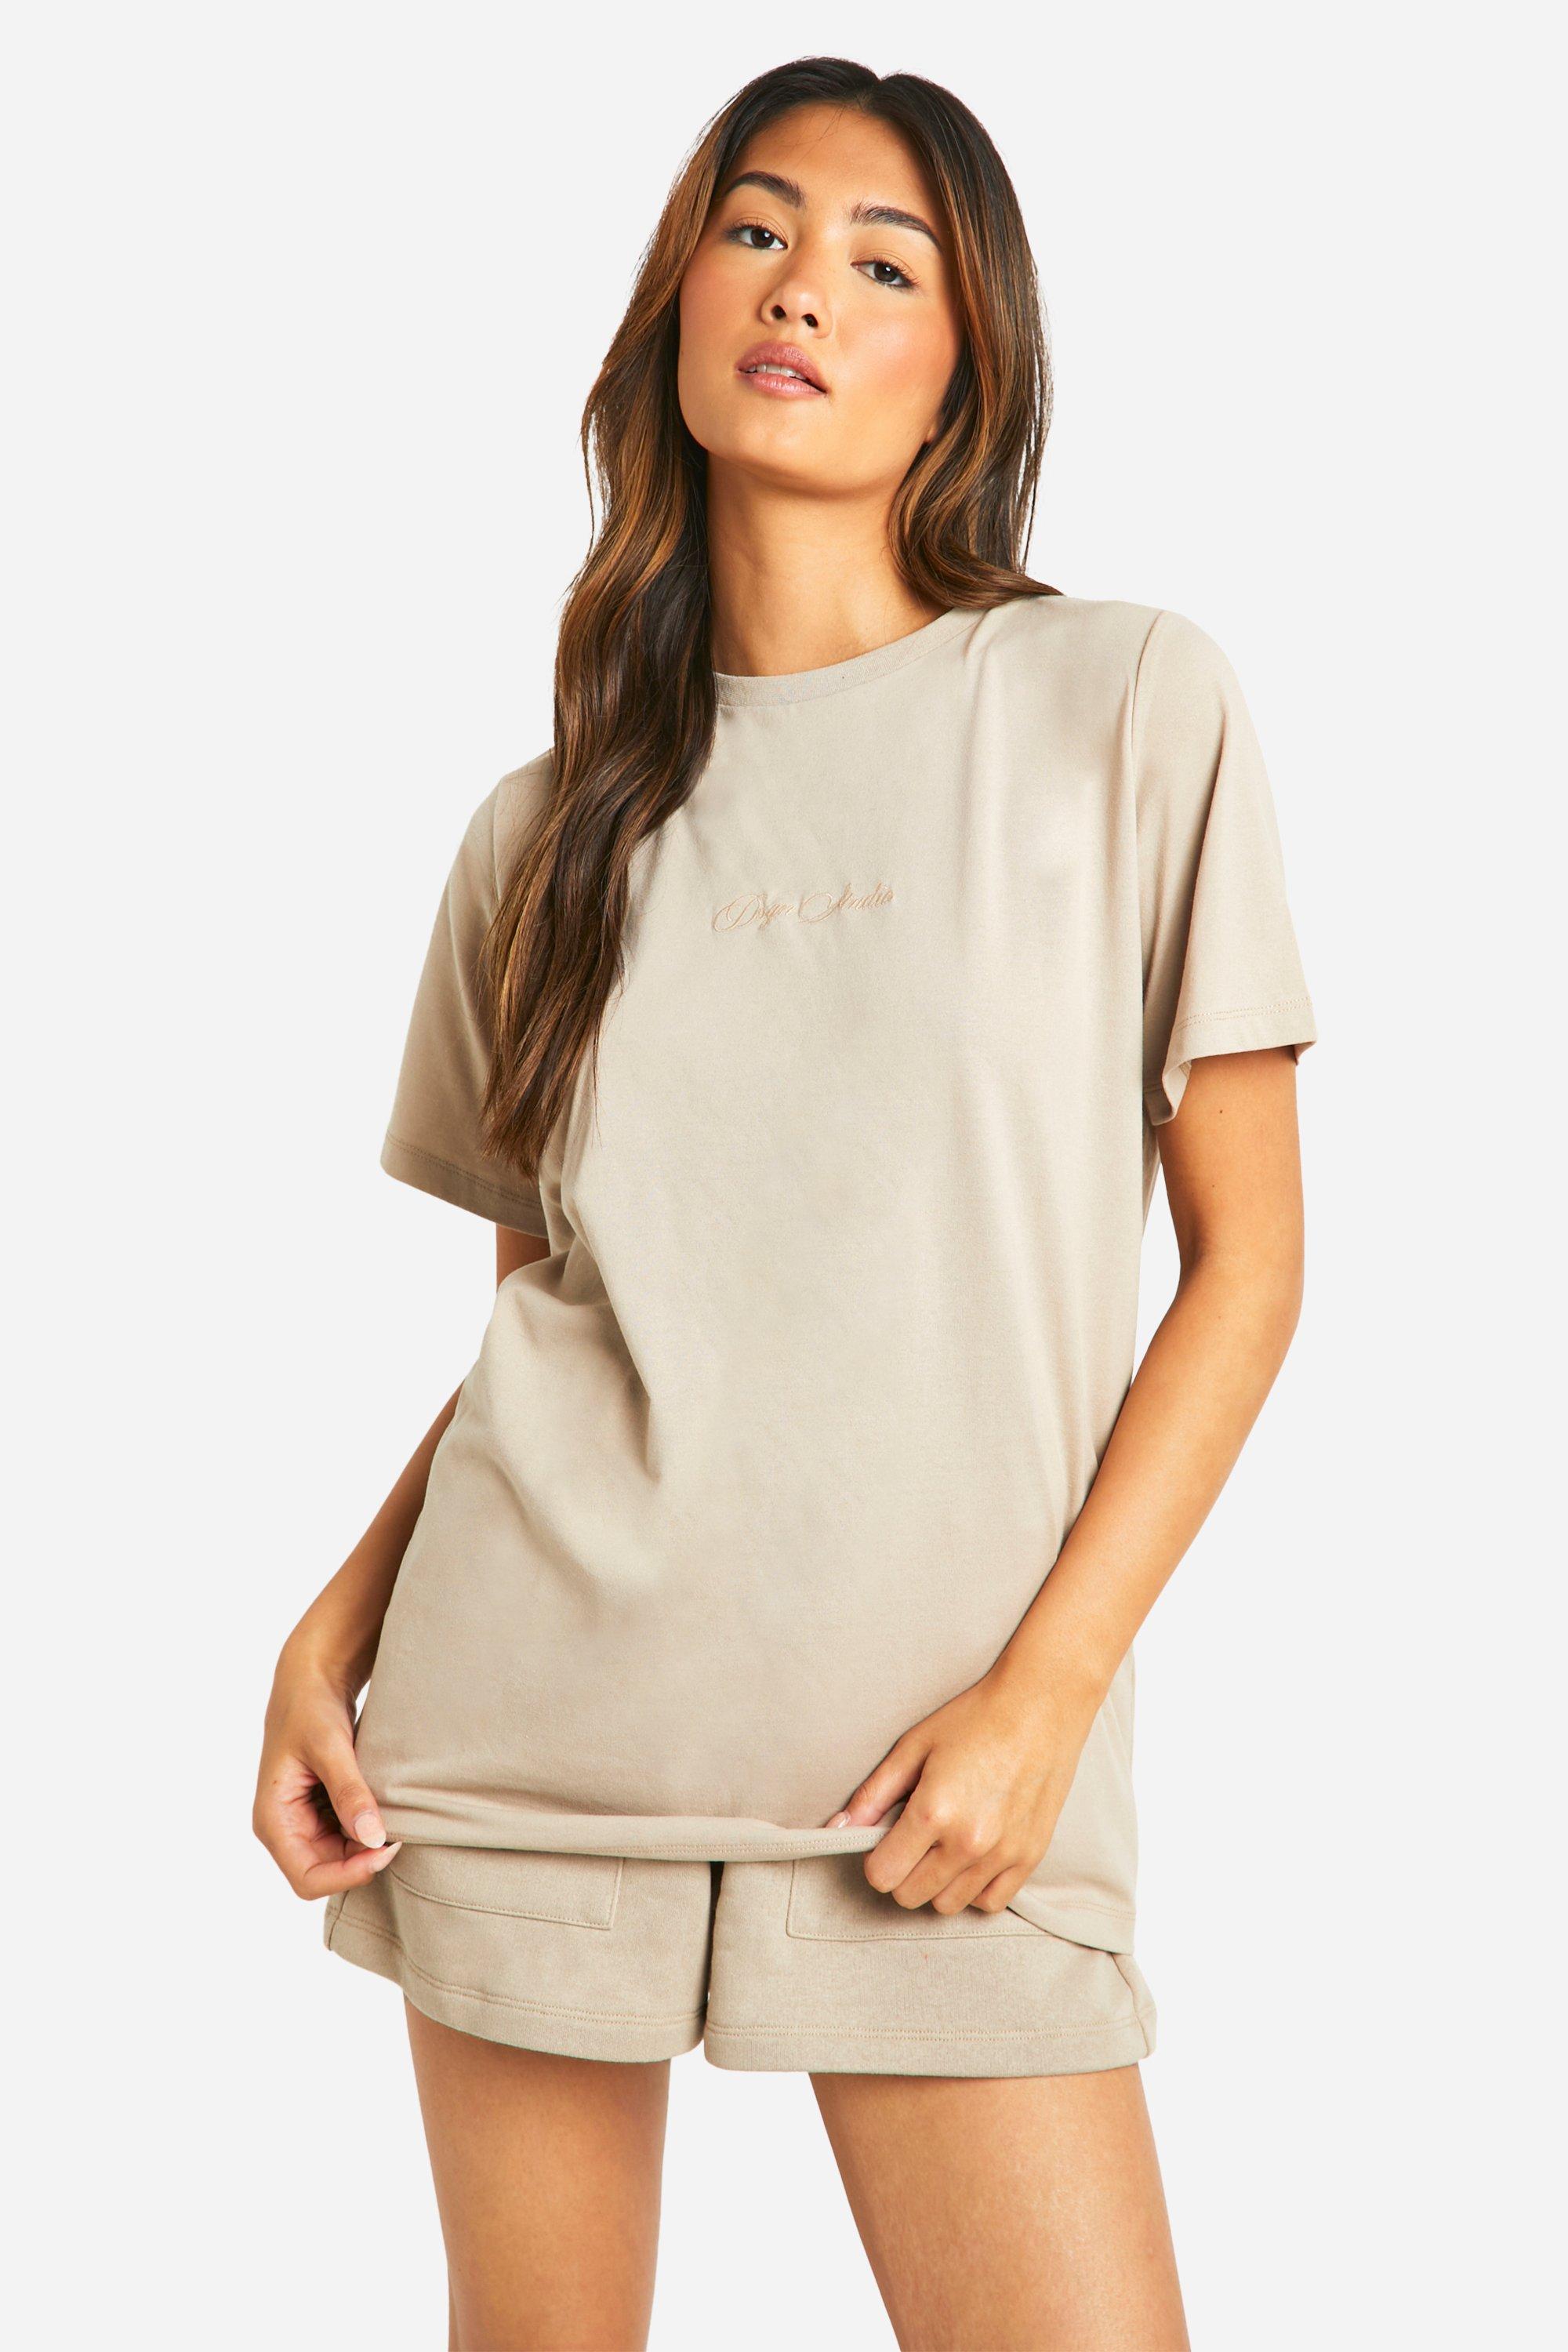 Image of Dsgn Studio Embroidered Oversized T-shirt, Beige